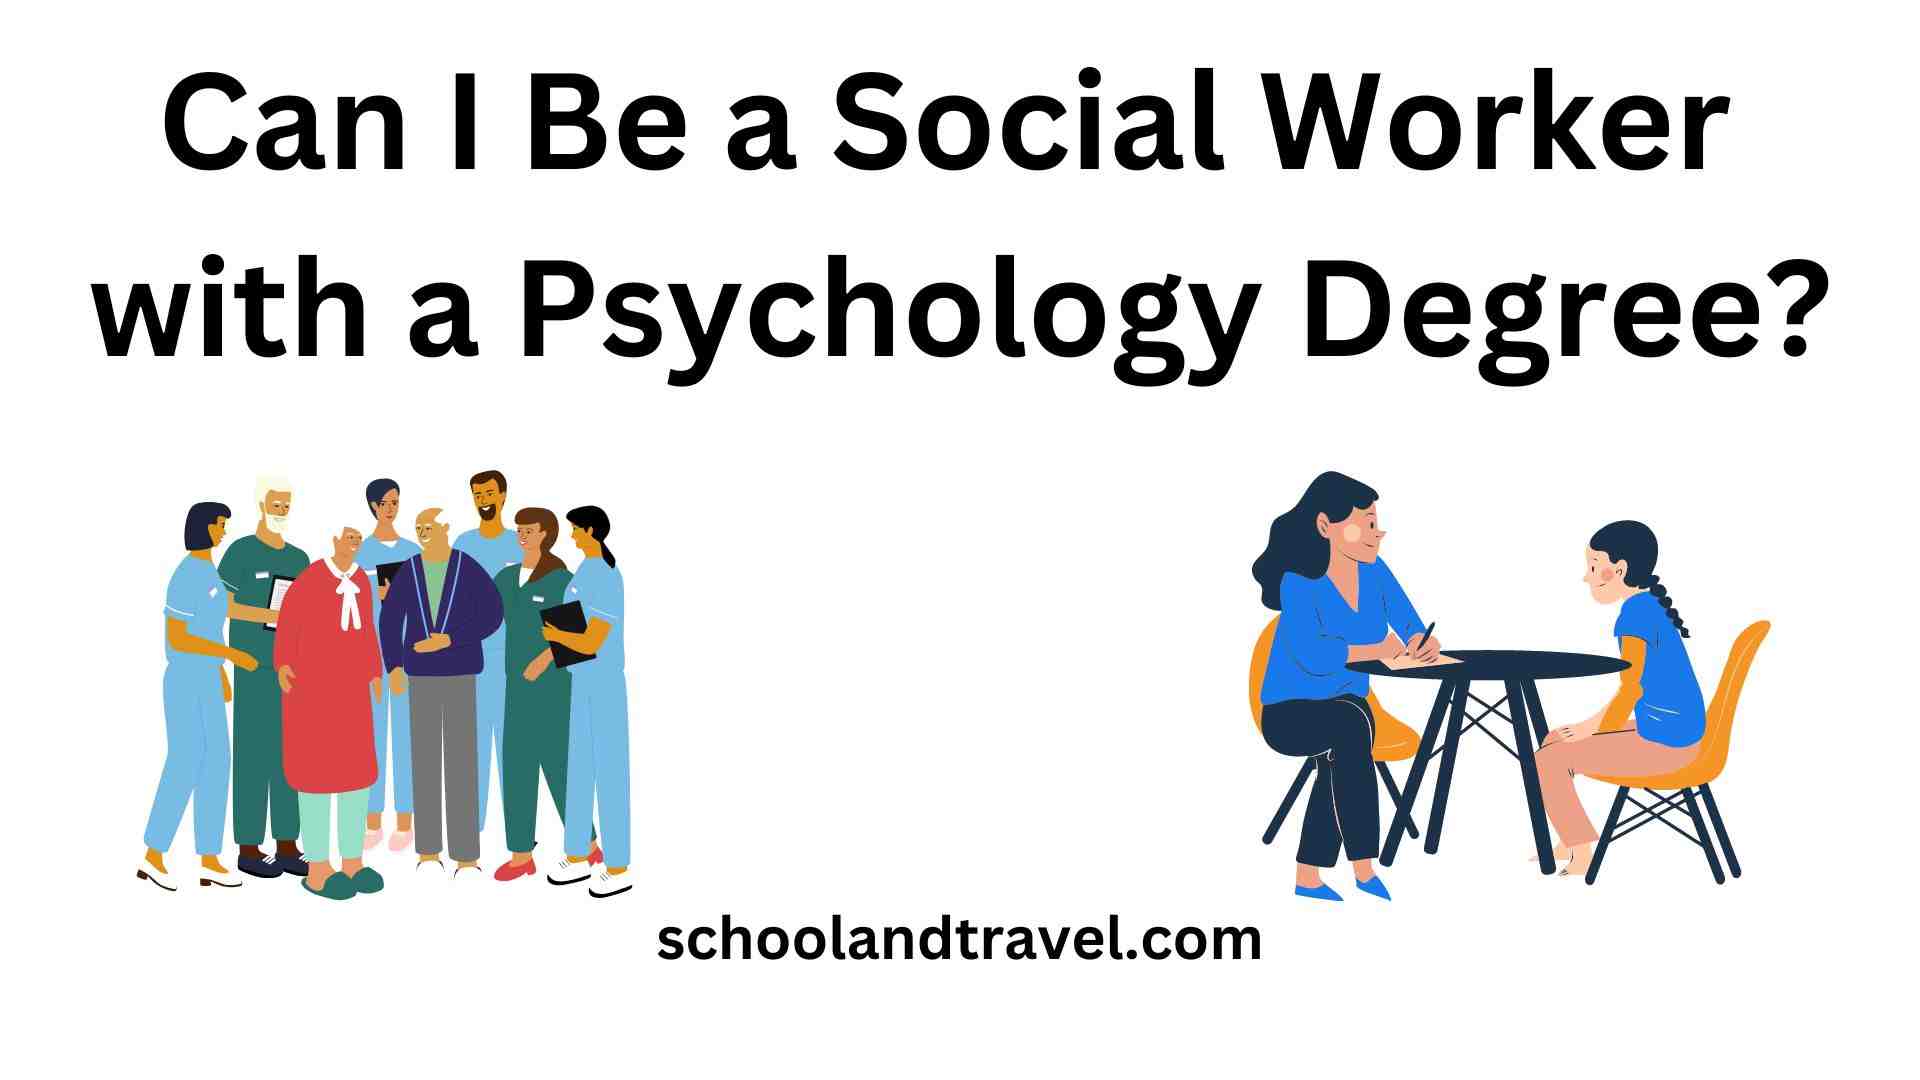 Can I Be a Social Worker with a Psychology Degree?